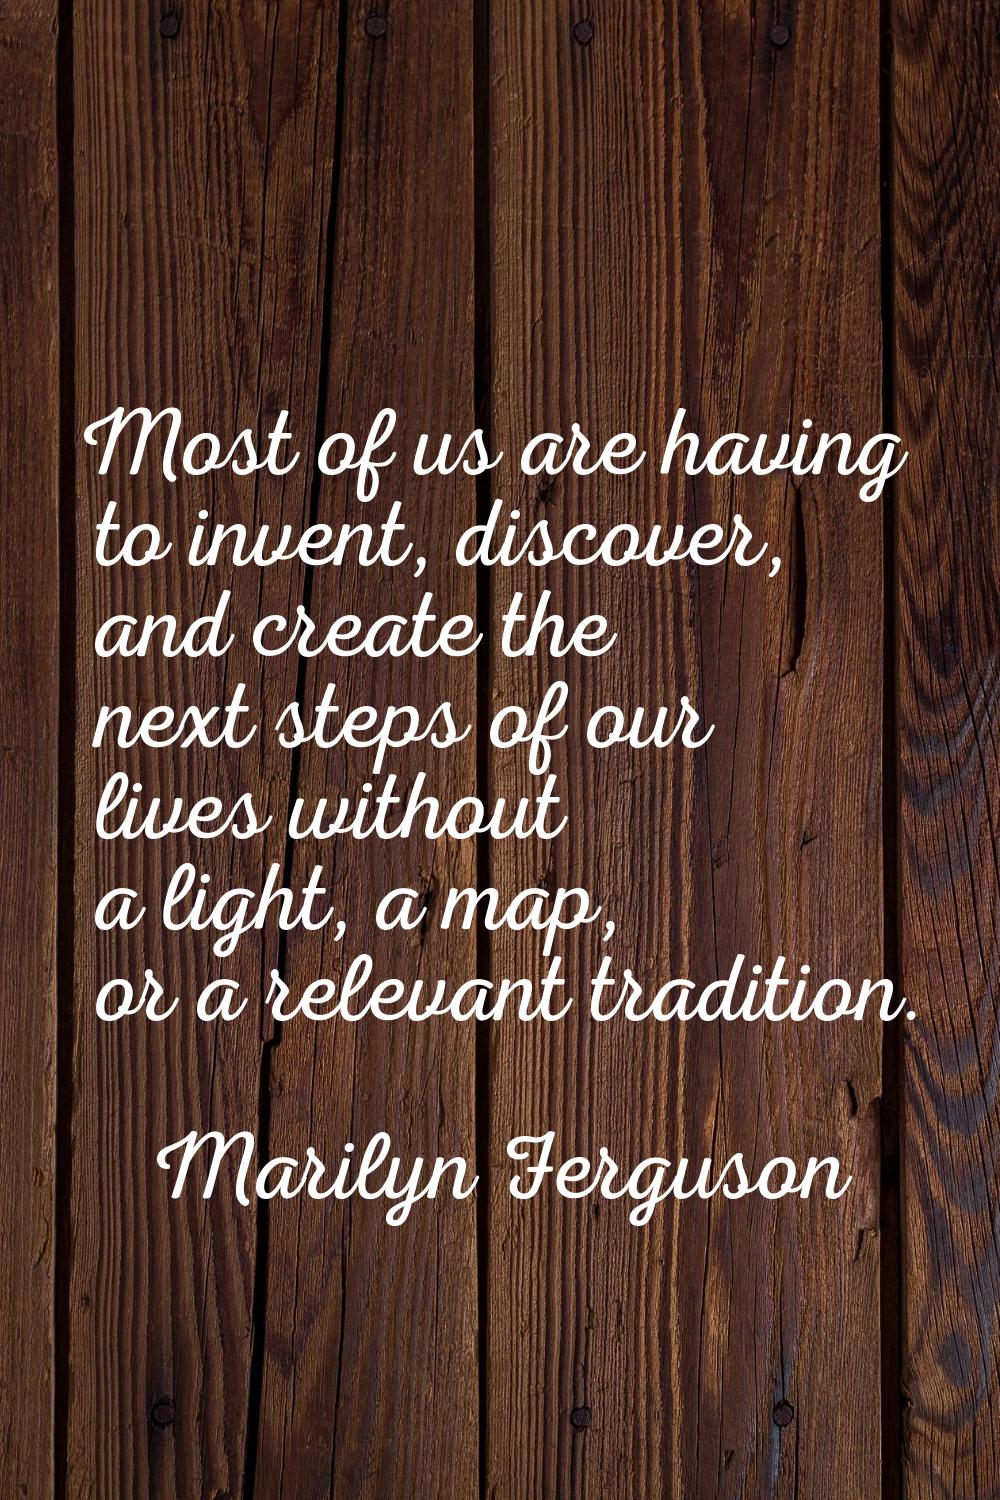 Most of us are having to invent, discover, and create the next steps of our lives without a light, 